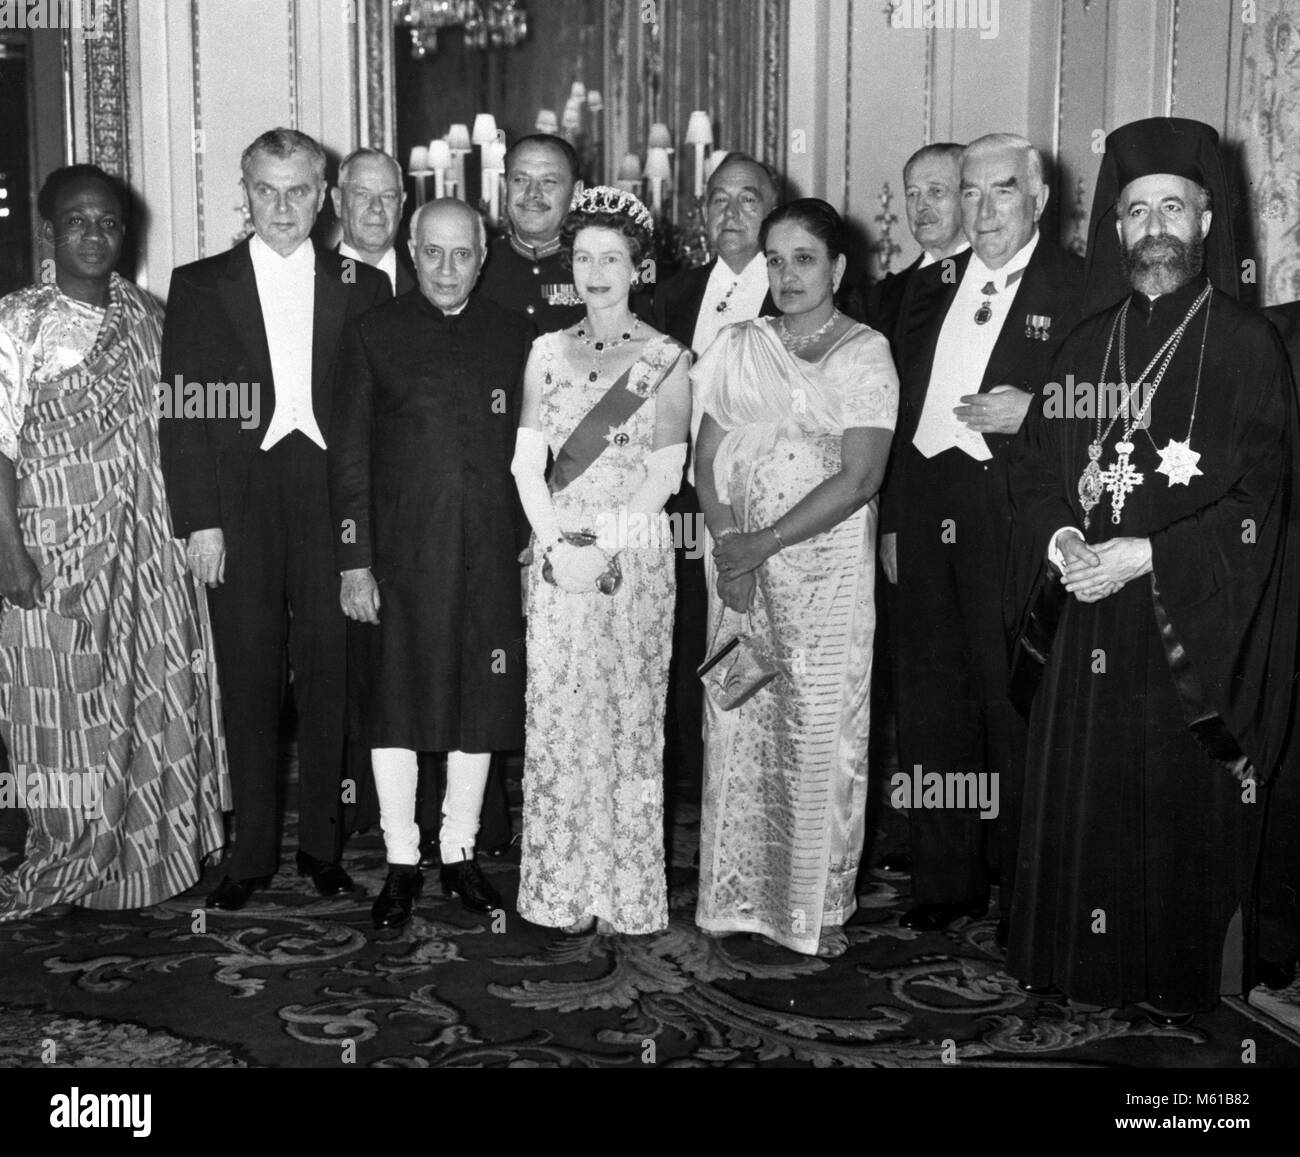 Queen Elizabeth II with the Prime Ministers and heads of state attending the Commonwealth Prime Ministers' Conference at the dinner party she gave at Buckingham Palace. With the Queen are (L-R) Dr Kwame Nkrumah (Ghana), John Diefenbaker (Canada), Dr Hendrik Verwoerd (South Africa), Jawaharlal Nehru (India), Field Marshal Muhammad Ayub Khan (Pakistan), Sir Roy Welensky (Rhodesia and Nyasaland), Mrs Sirimavo Bandaranaike (Ceylon), Harold Macmillan (Britain), Robert Menzies (Australia) and Archbishop Makarios (Cyprus). Stock Photo